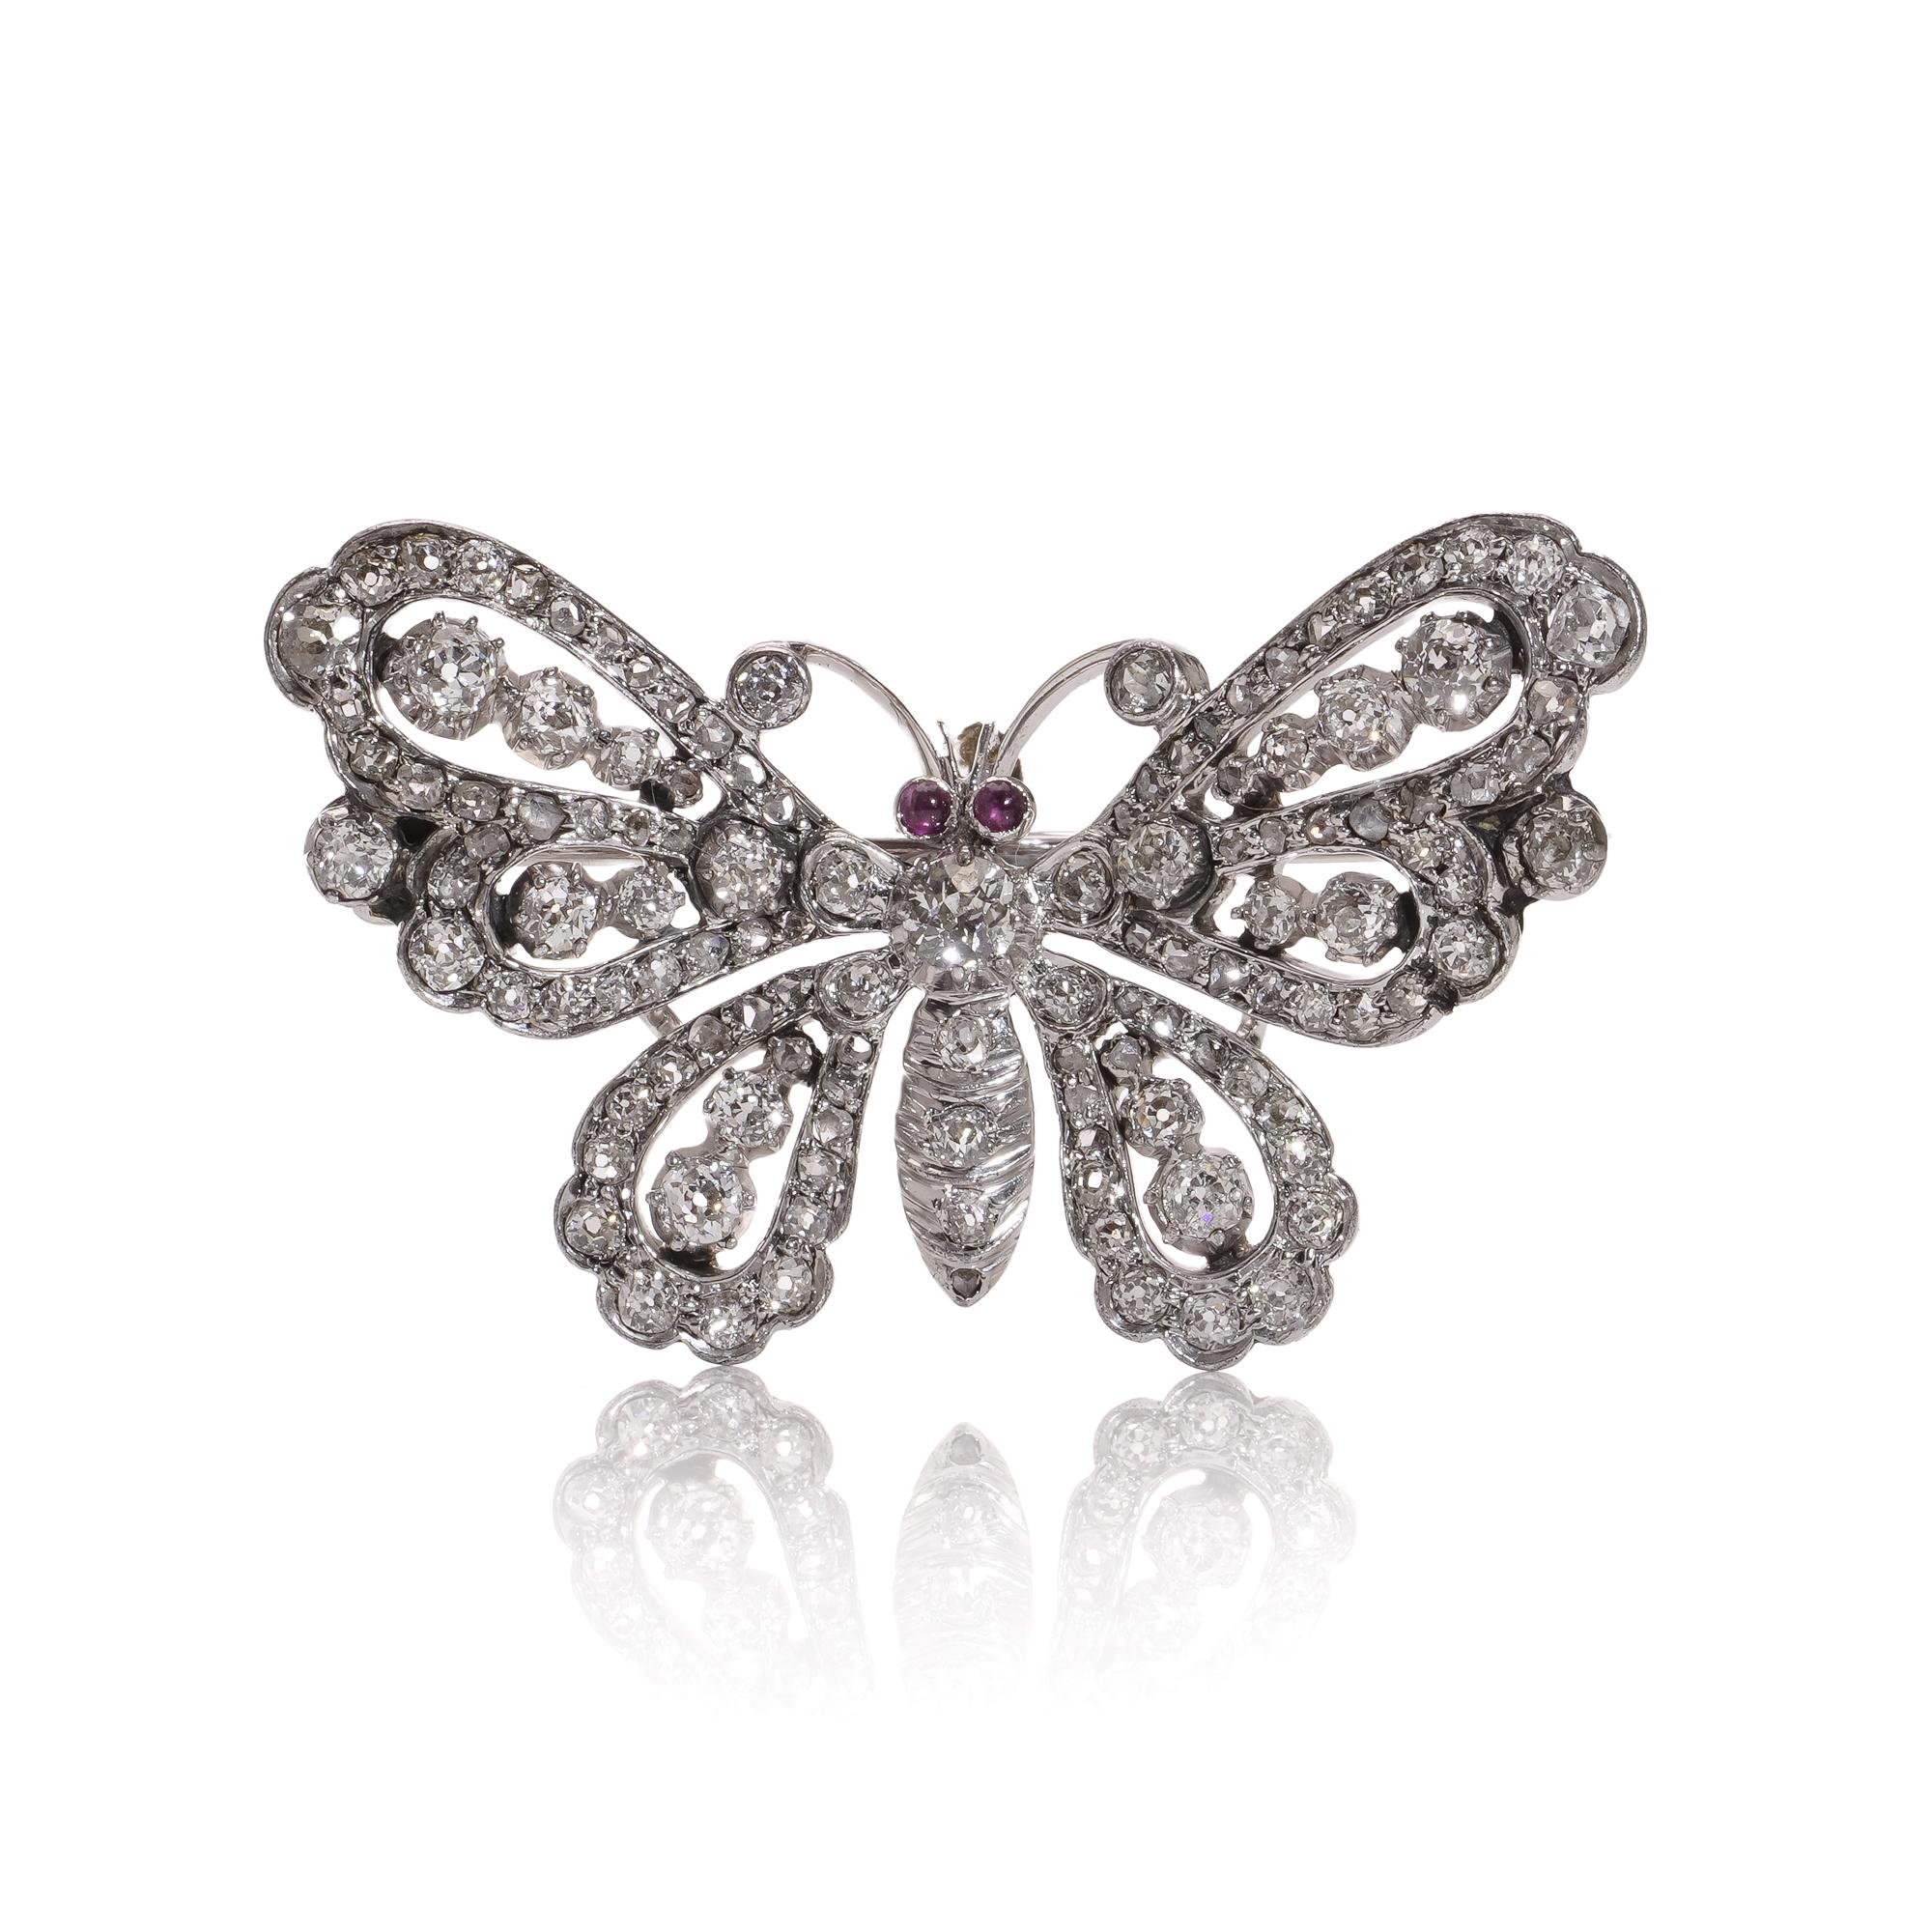 Antique Victorian 9kt white gold and silver butterfly brooch with old cut diamonds rubies.
Made in England, Circa 1890s.
X-ray tested positive for 9kt gold and silver.

The dimensions -
Size: 3.9 x 2.5 cm
Weight : 7.00 grams

Rubies -
Cut: Round